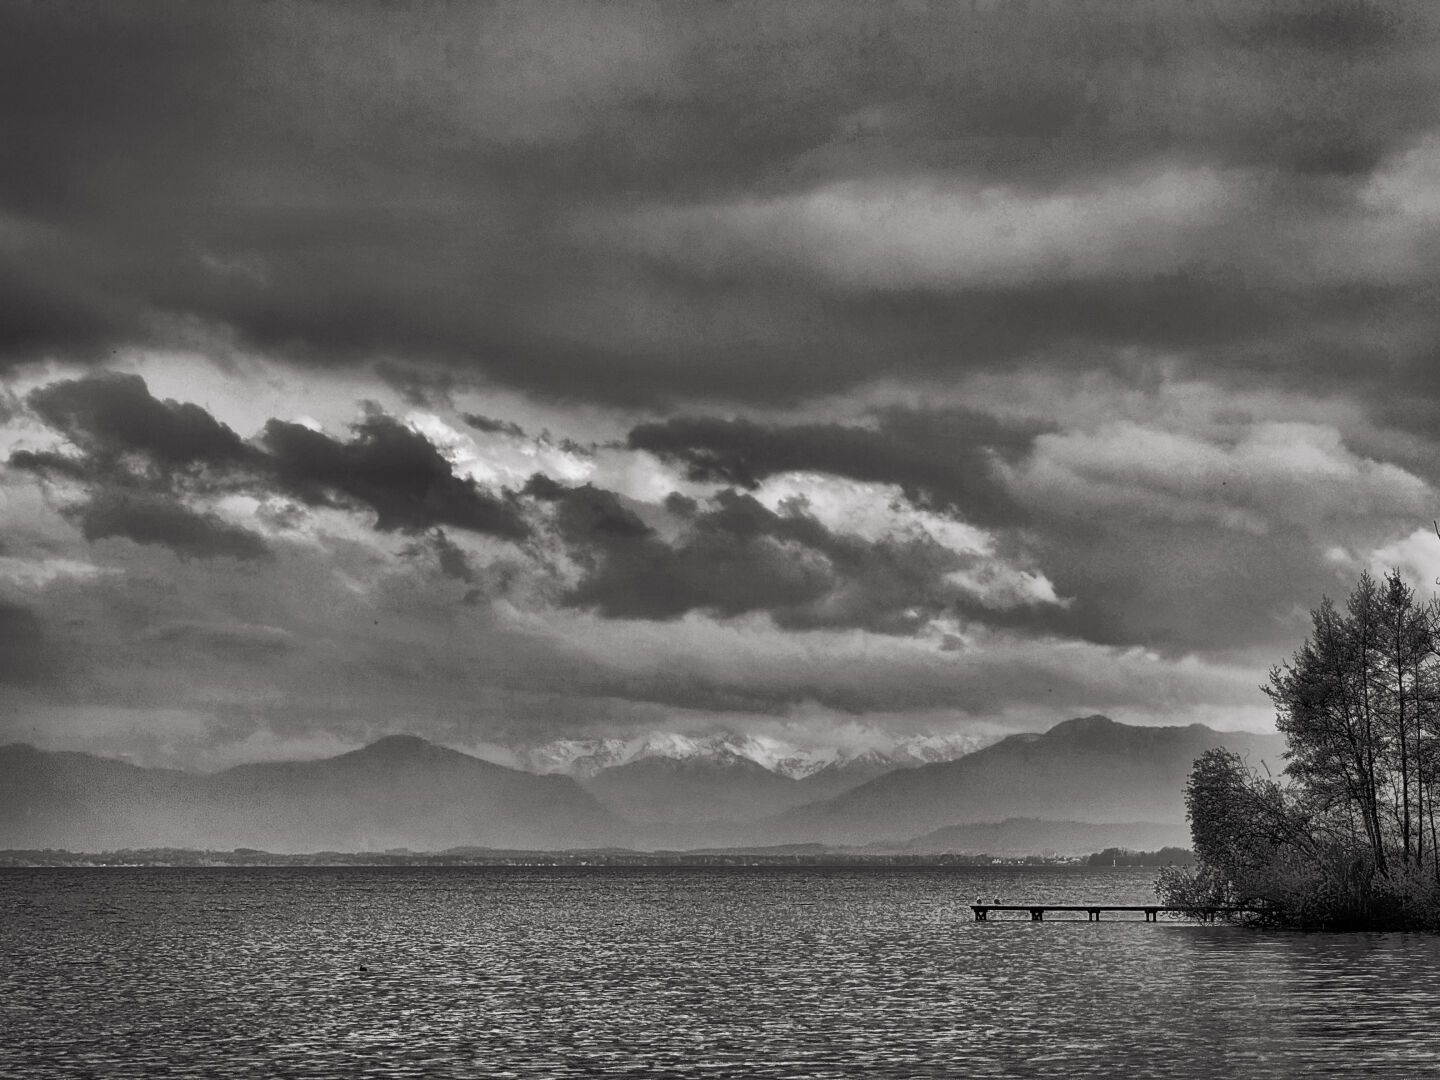 I'm at Lake Starnberg and the weather is so bad that a black and white photo shows the situation better than a color photo. The onset of winter swallowed up all the colors. Shortly afterwards, the first snowflakes fell.

#winterinapril #stormyweather #bayern #blackandwhitephotography #landscapephotography #photography